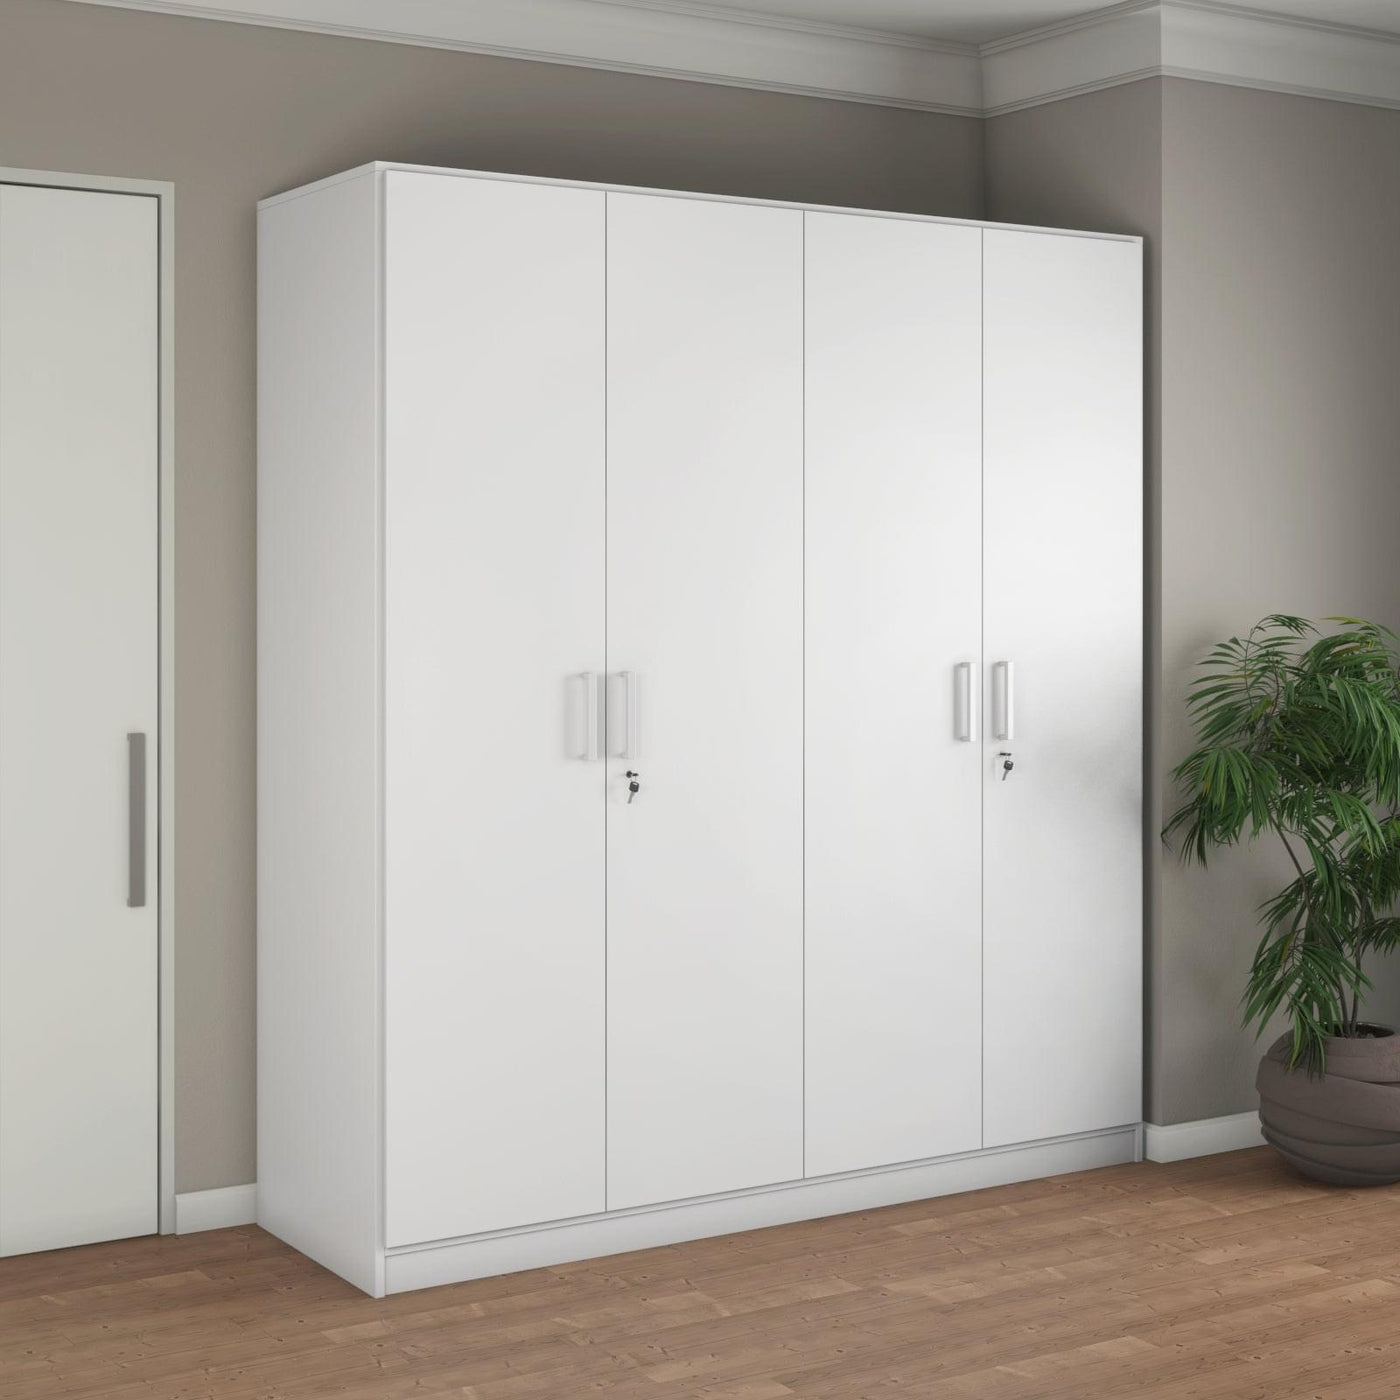 Max 4 Door Engineered Wood Wardrobe without Mirror (Frosty White)